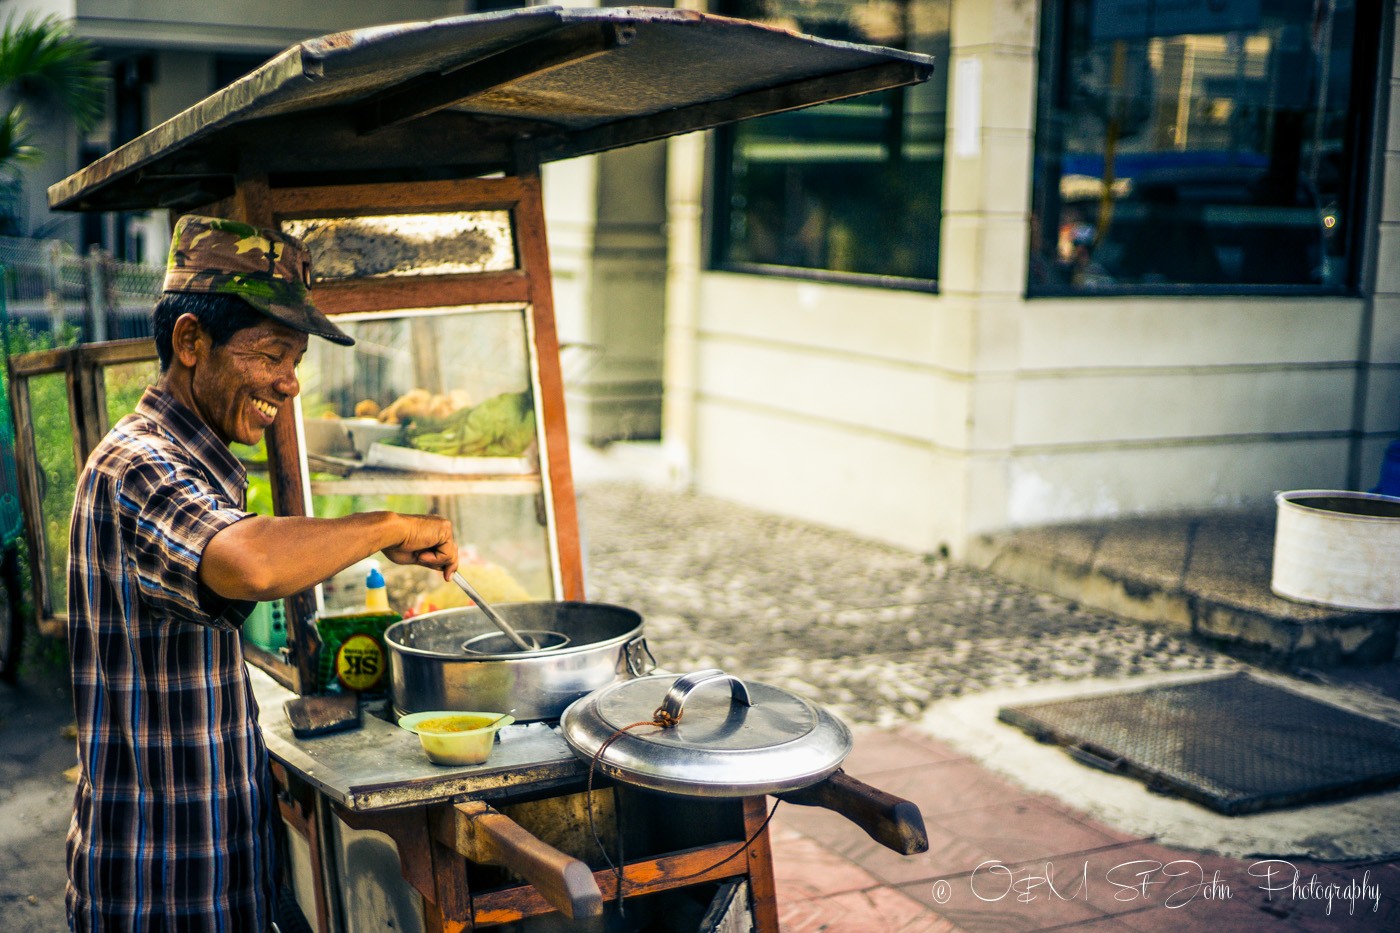 what to do in Yogyakarta: Visit one of the many small street food stalls near our hotel on Jalan Ponwocinatan